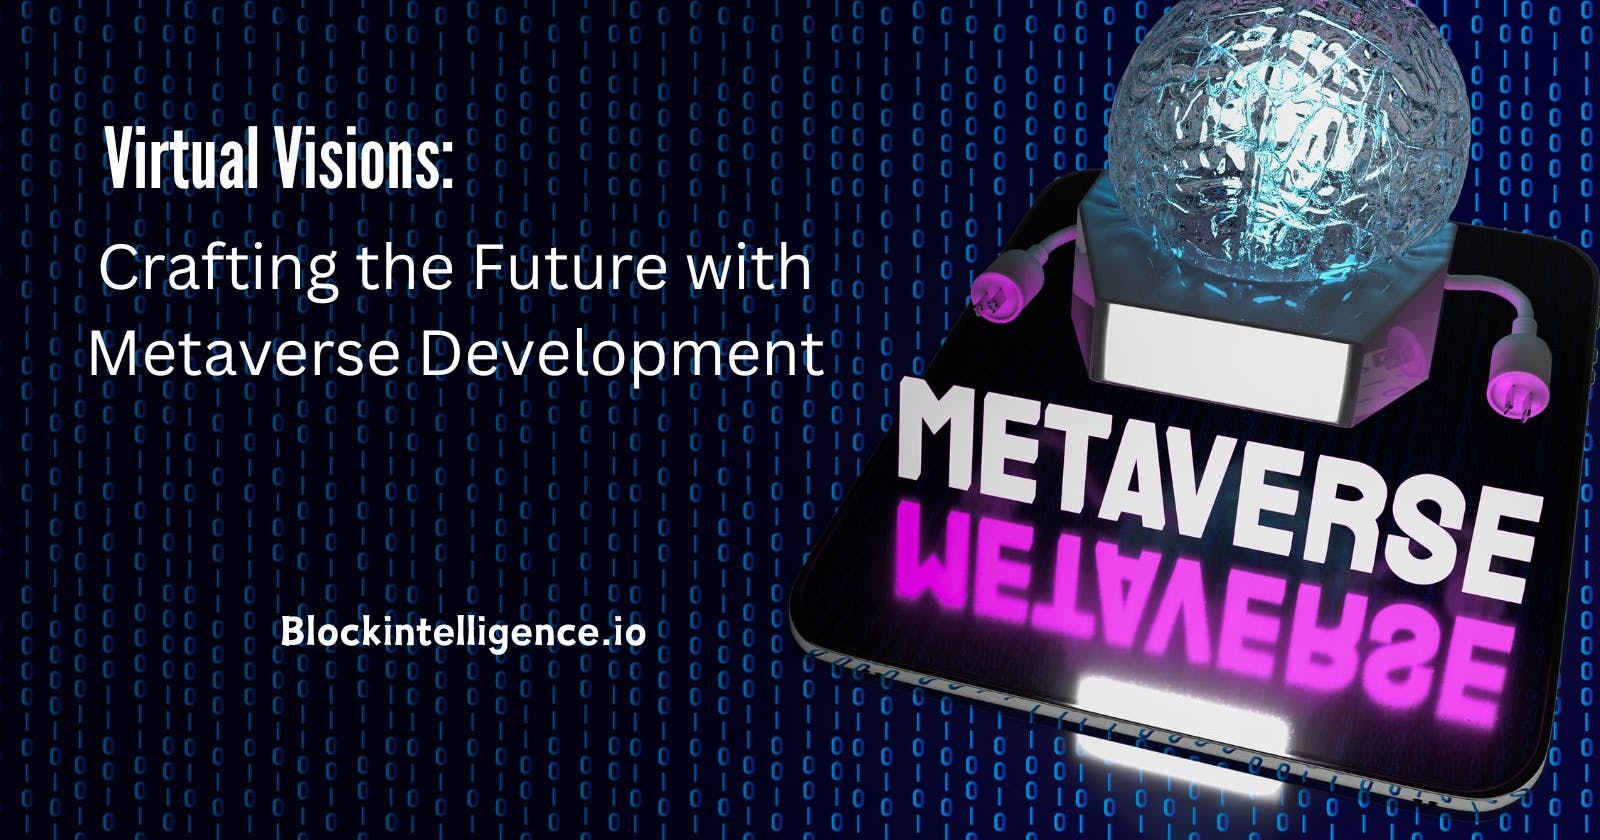 Virtual Visions: Crafting the Future with Metaverse Development